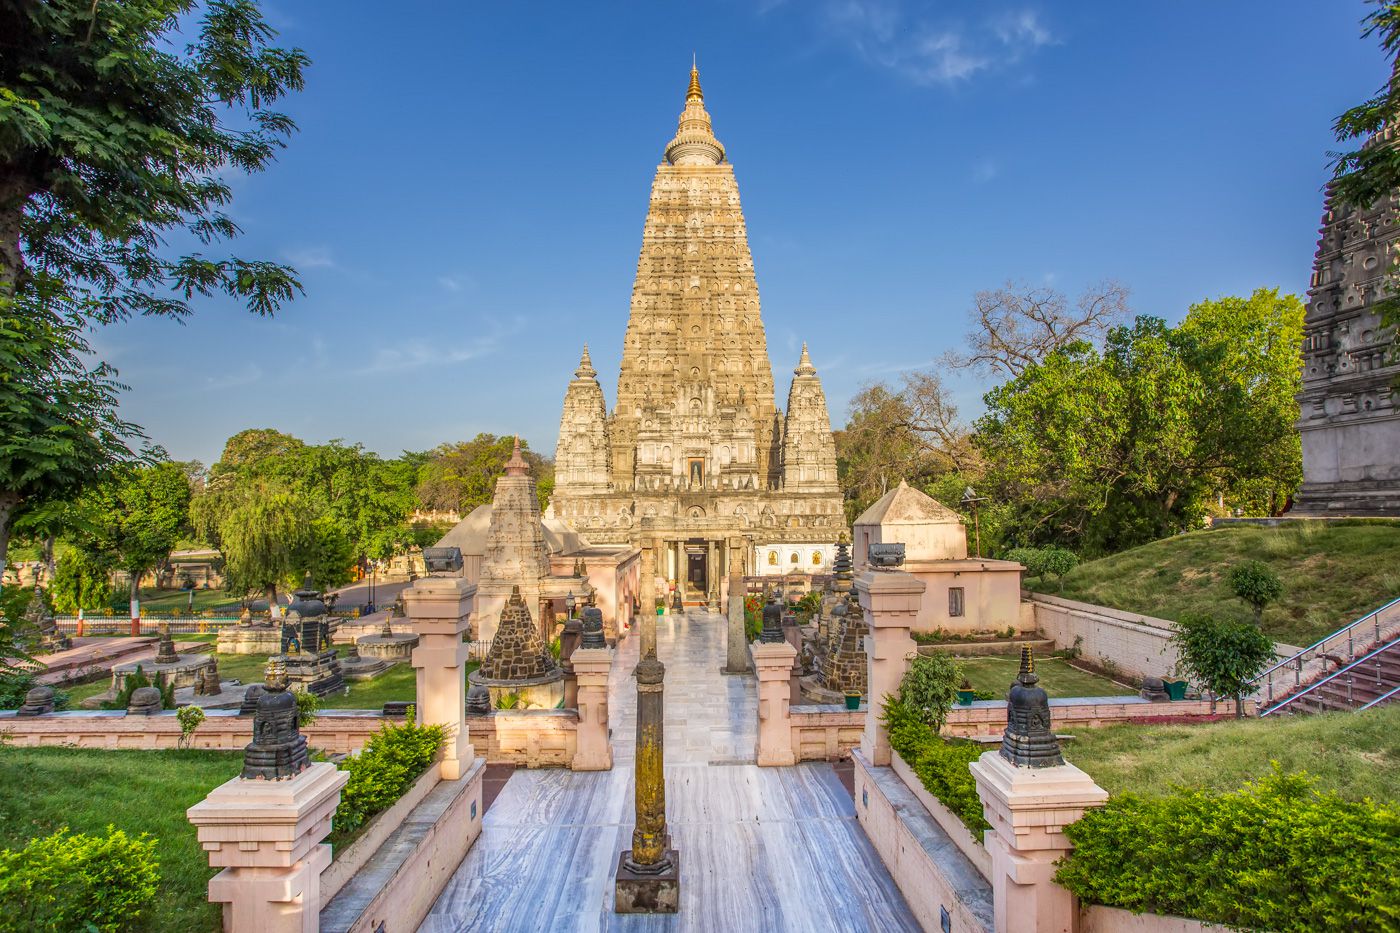  Bodh Gaya  Travel Cost Average Price of a Vacation to 